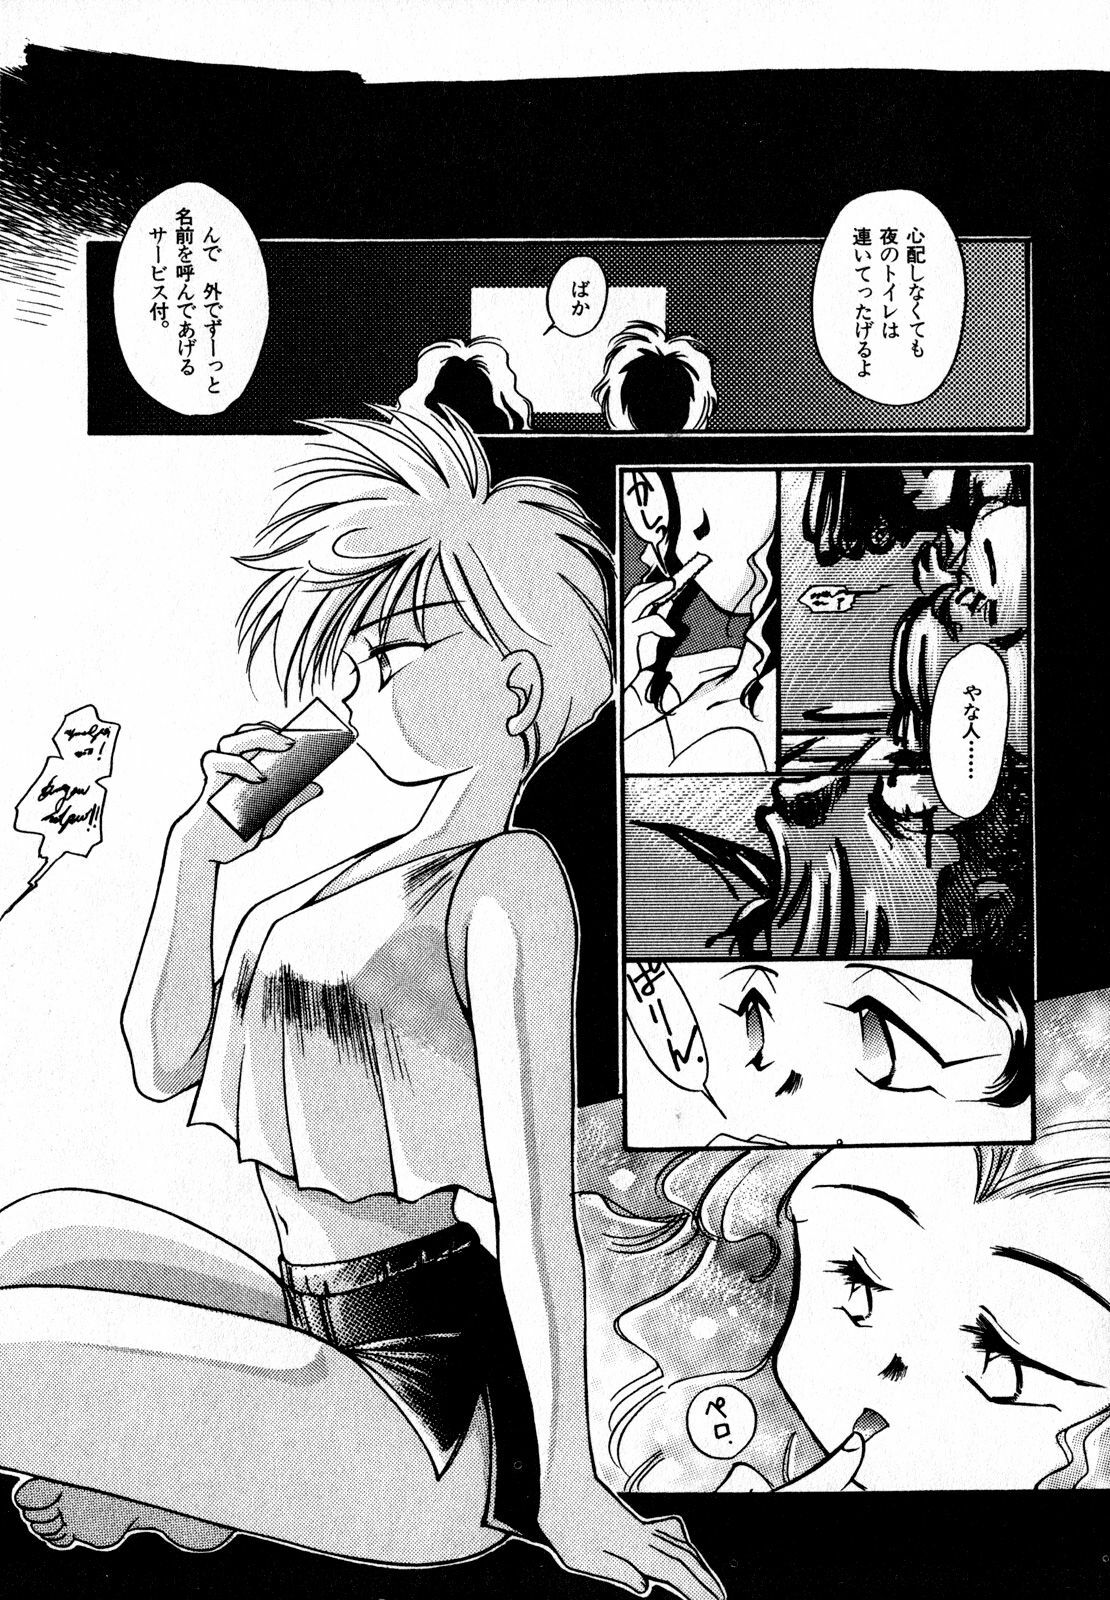 [Anthology] Lunatic Party 7 (Sailor Moon) page 18 full